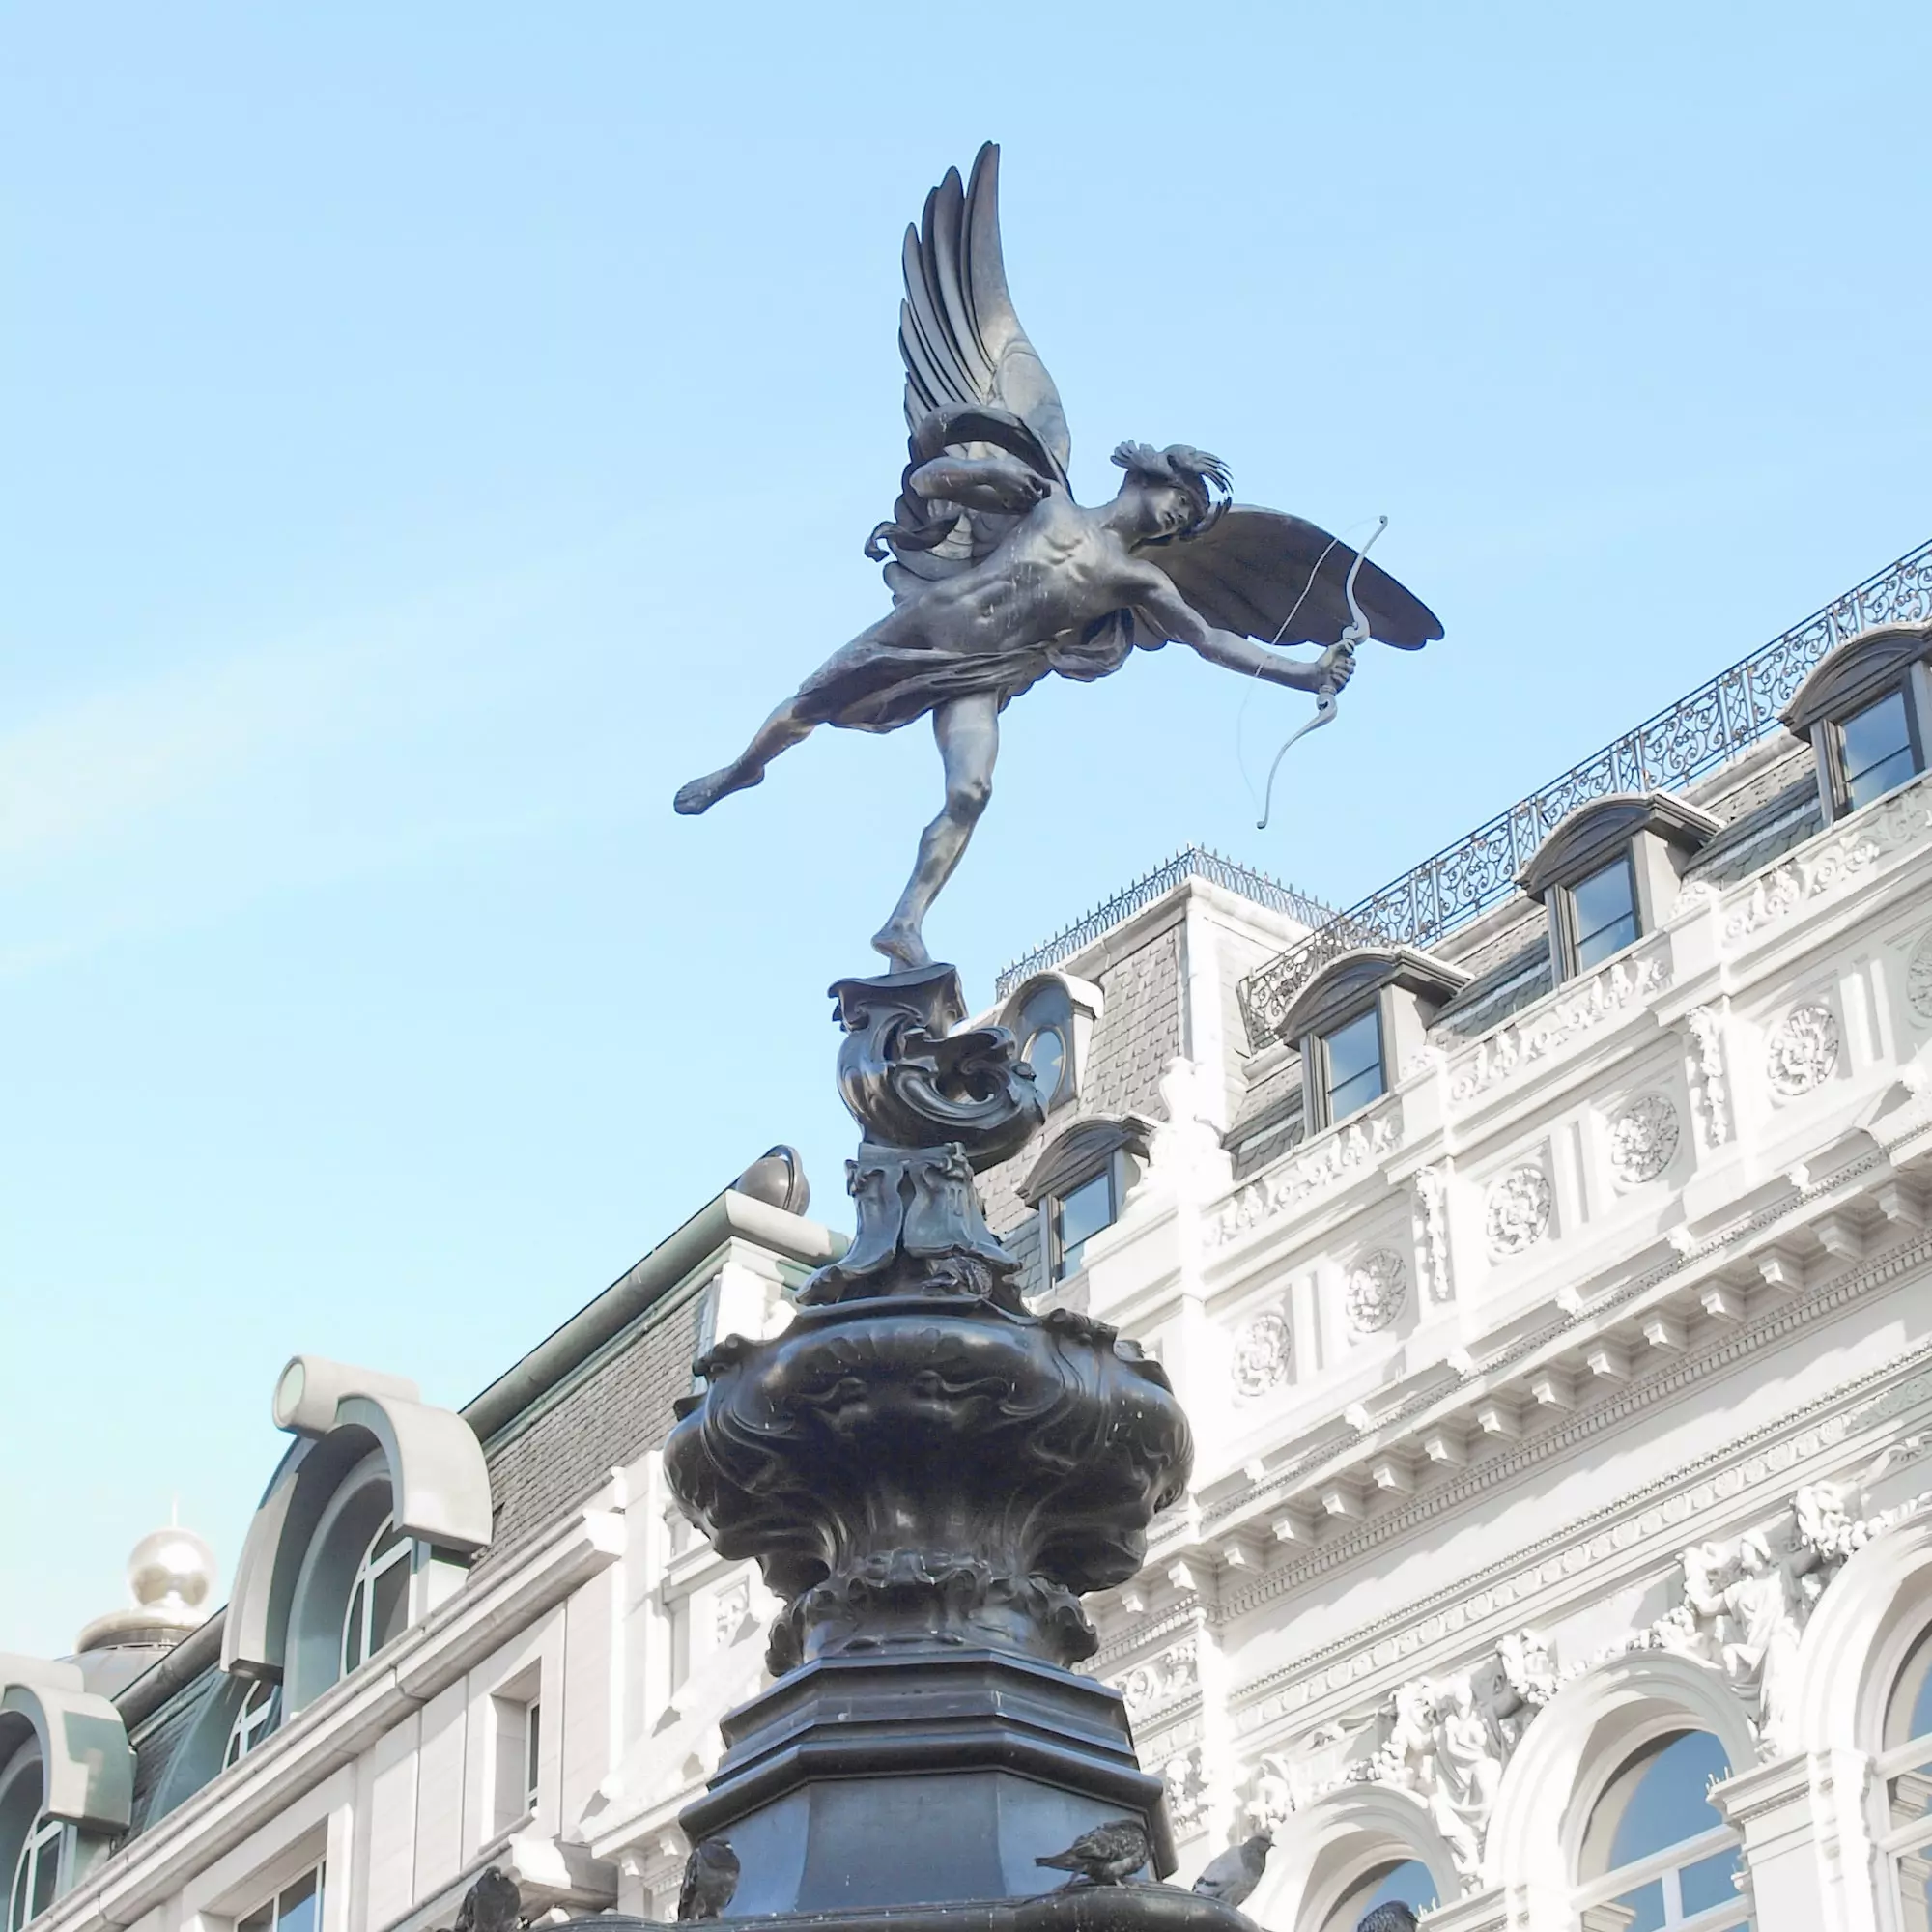 Statue of Eros in Piccadilly Circus